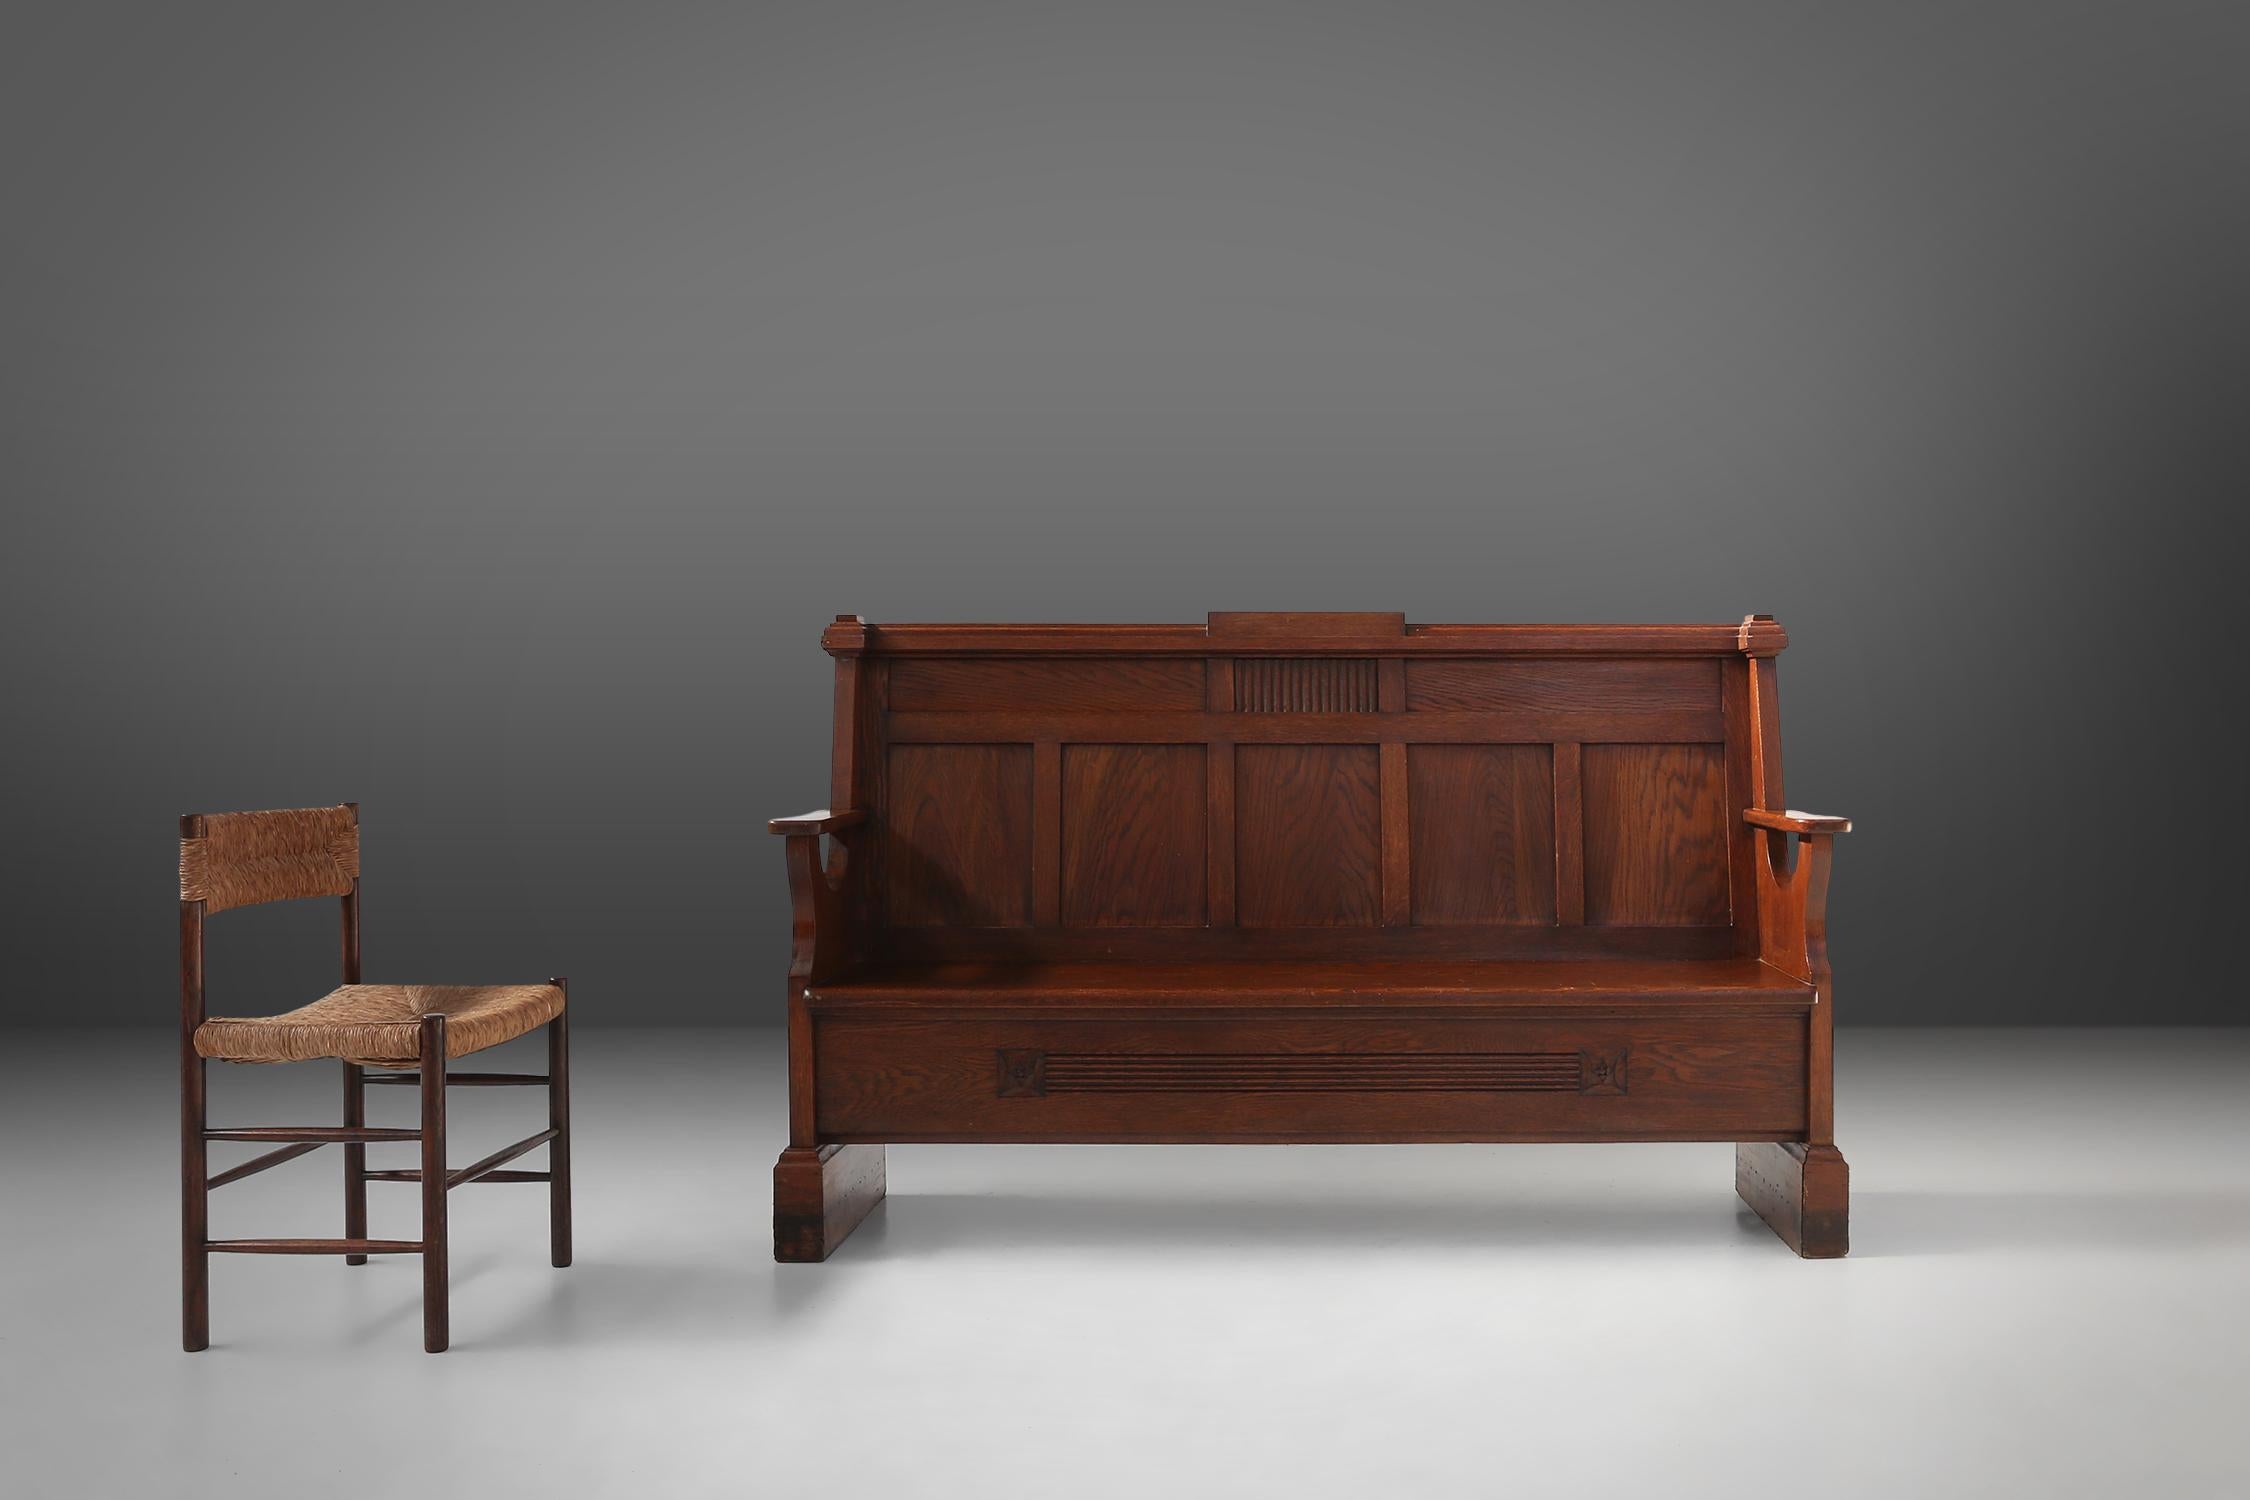 France / 1930s / bench / oak / Art Deco

Rare Art Deco seat in solid oak made in France in the 1930s. Beautifully made in fine oak wood with subtile Art Deco carvings and panels. This spacious bench offers a comfortable space for 3 people. With